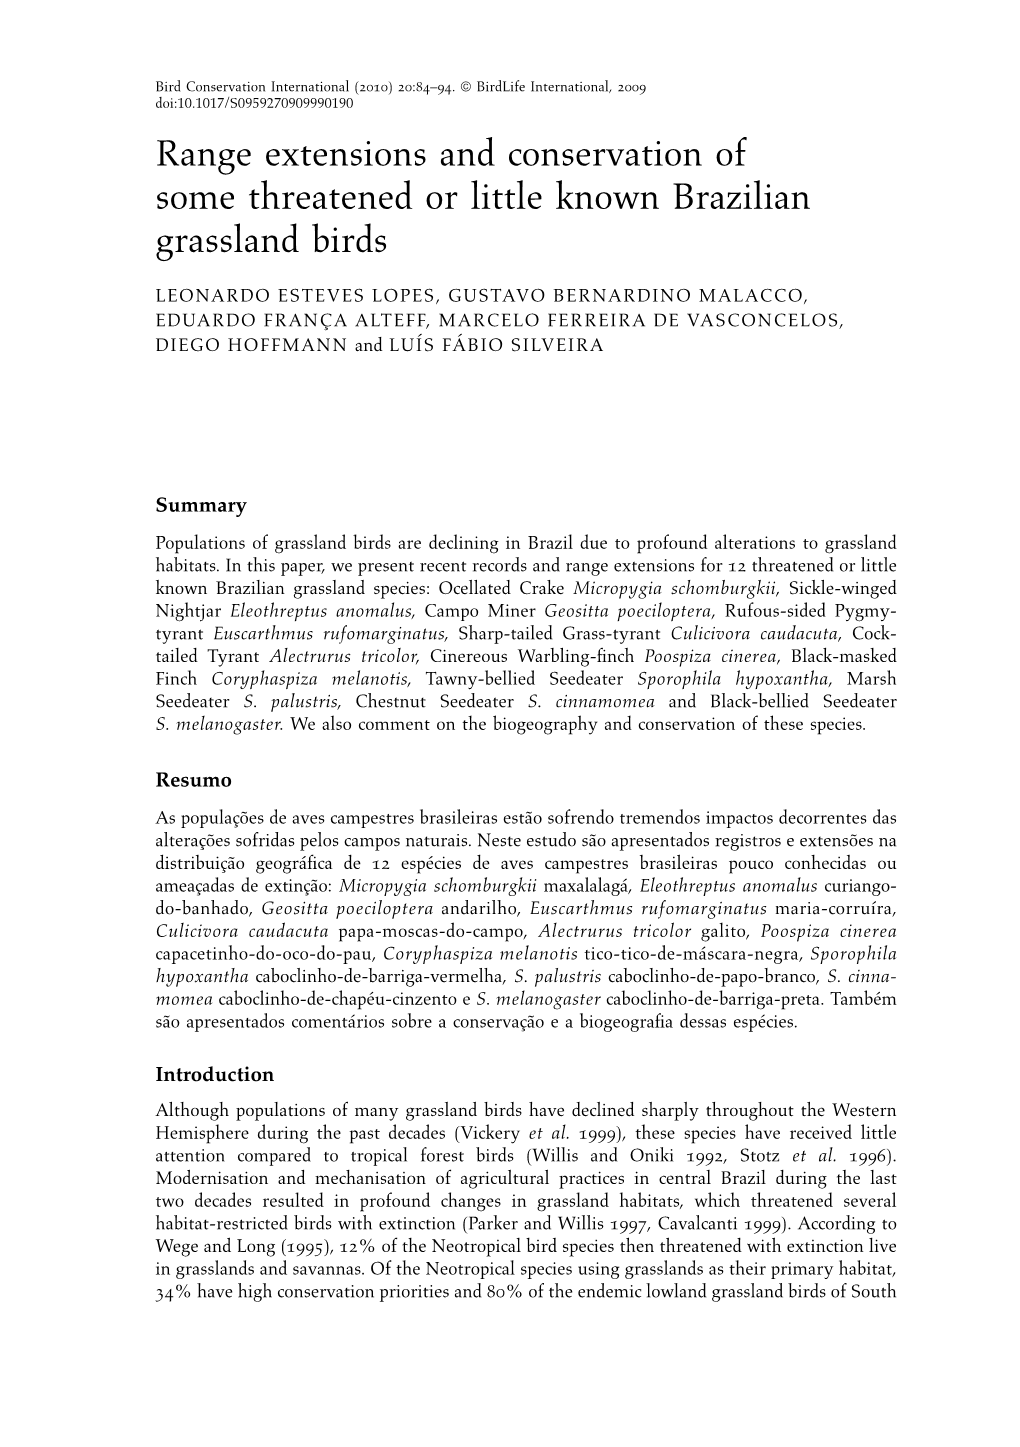 Range Extensions and Conservation of Some Threatened Or Little Known Brazilian Grassland Birds